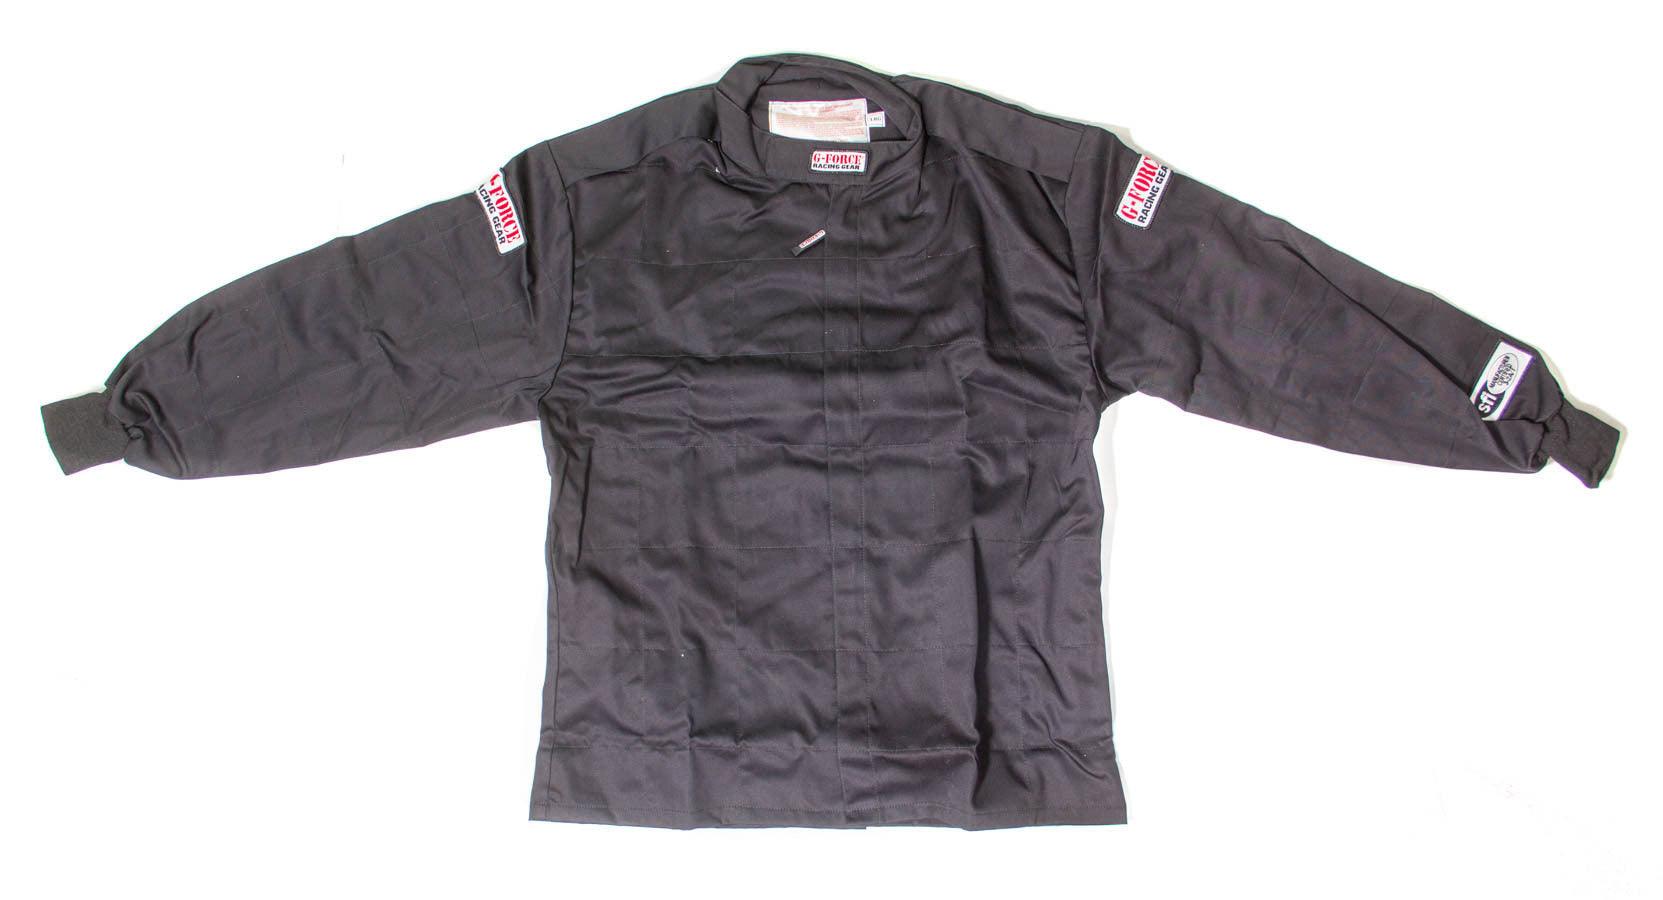 GF125 Jacket Only Small Black - Burlile Performance Products